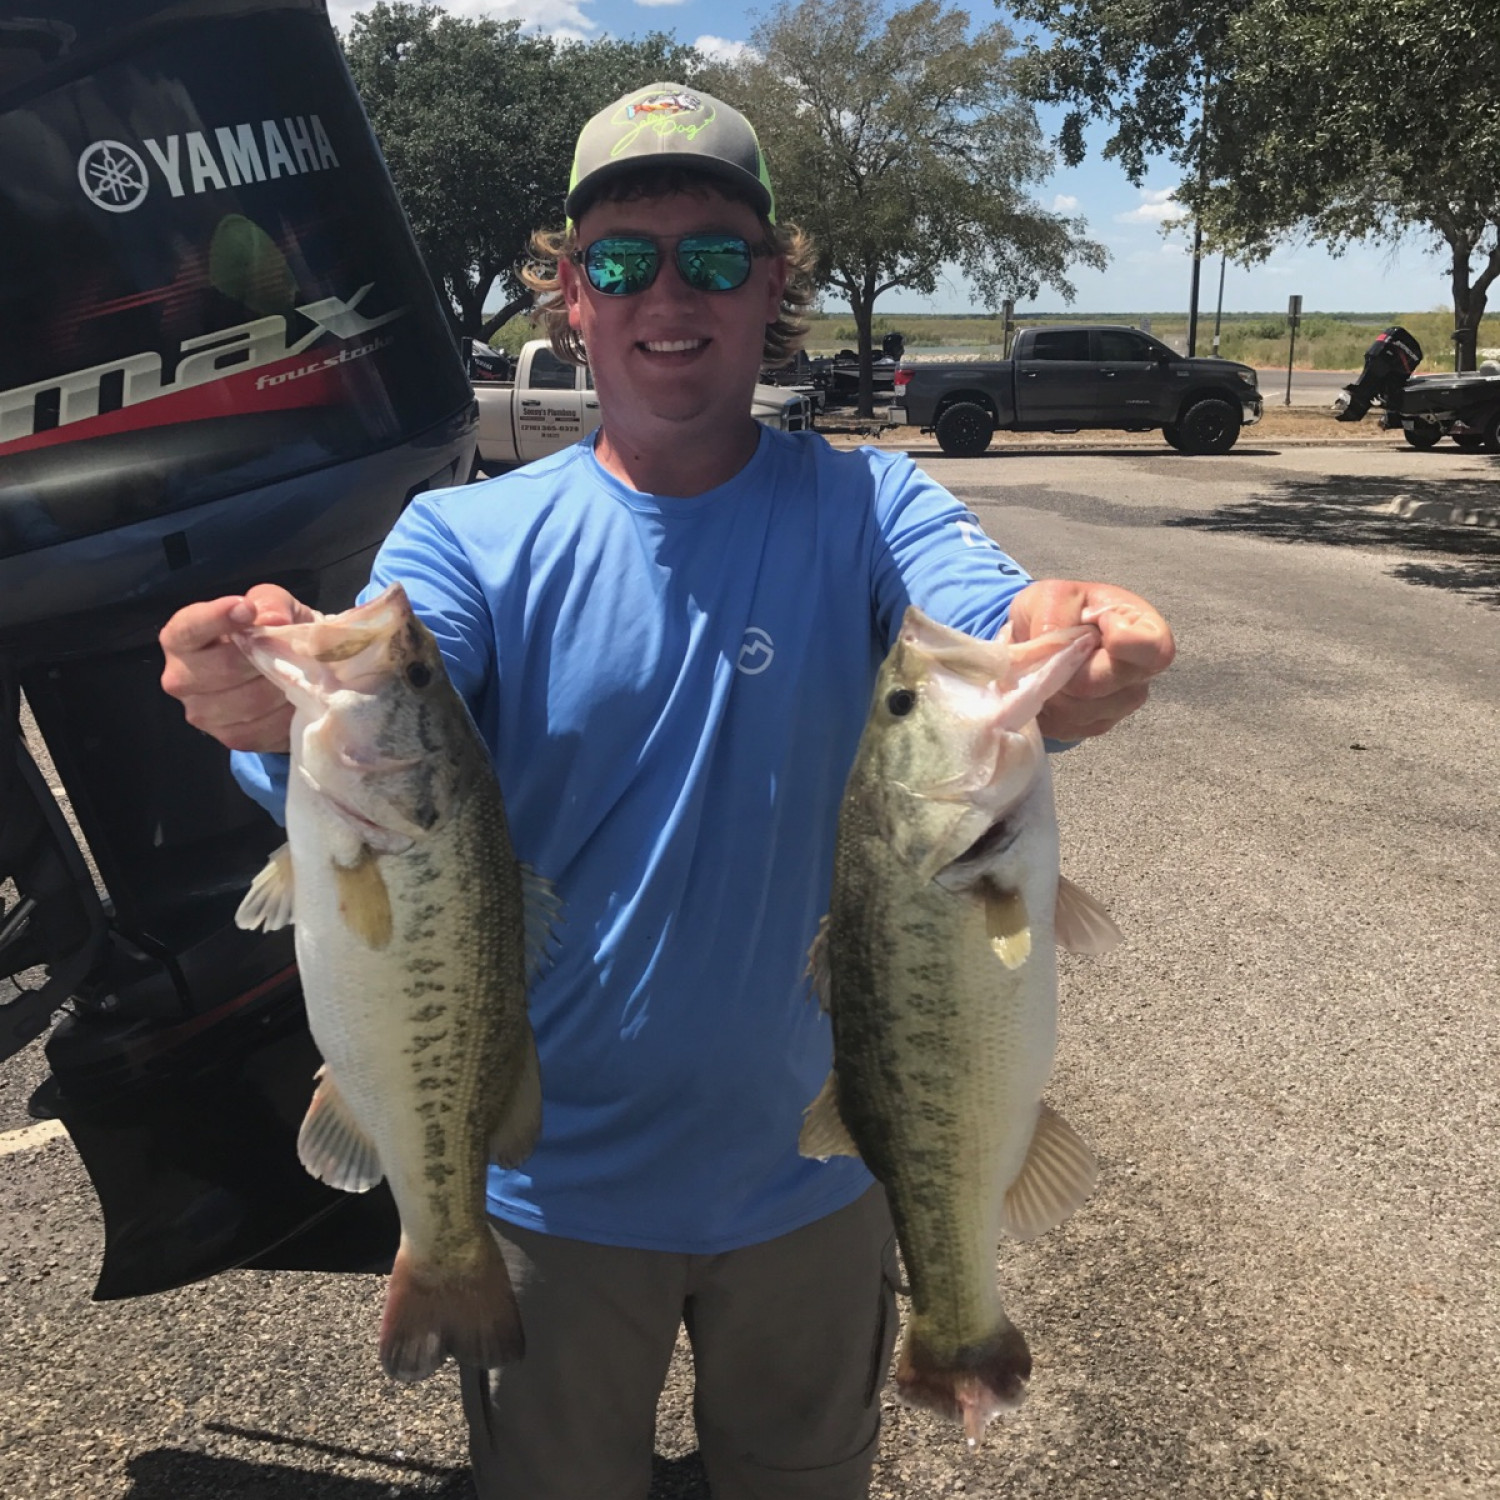 Title: 2 nice bass - On board their Sportsman Tournament 214 Bay Boat - Location: Choke canyon texas. Participating in the Photo Contest #SportsmanDecember2017